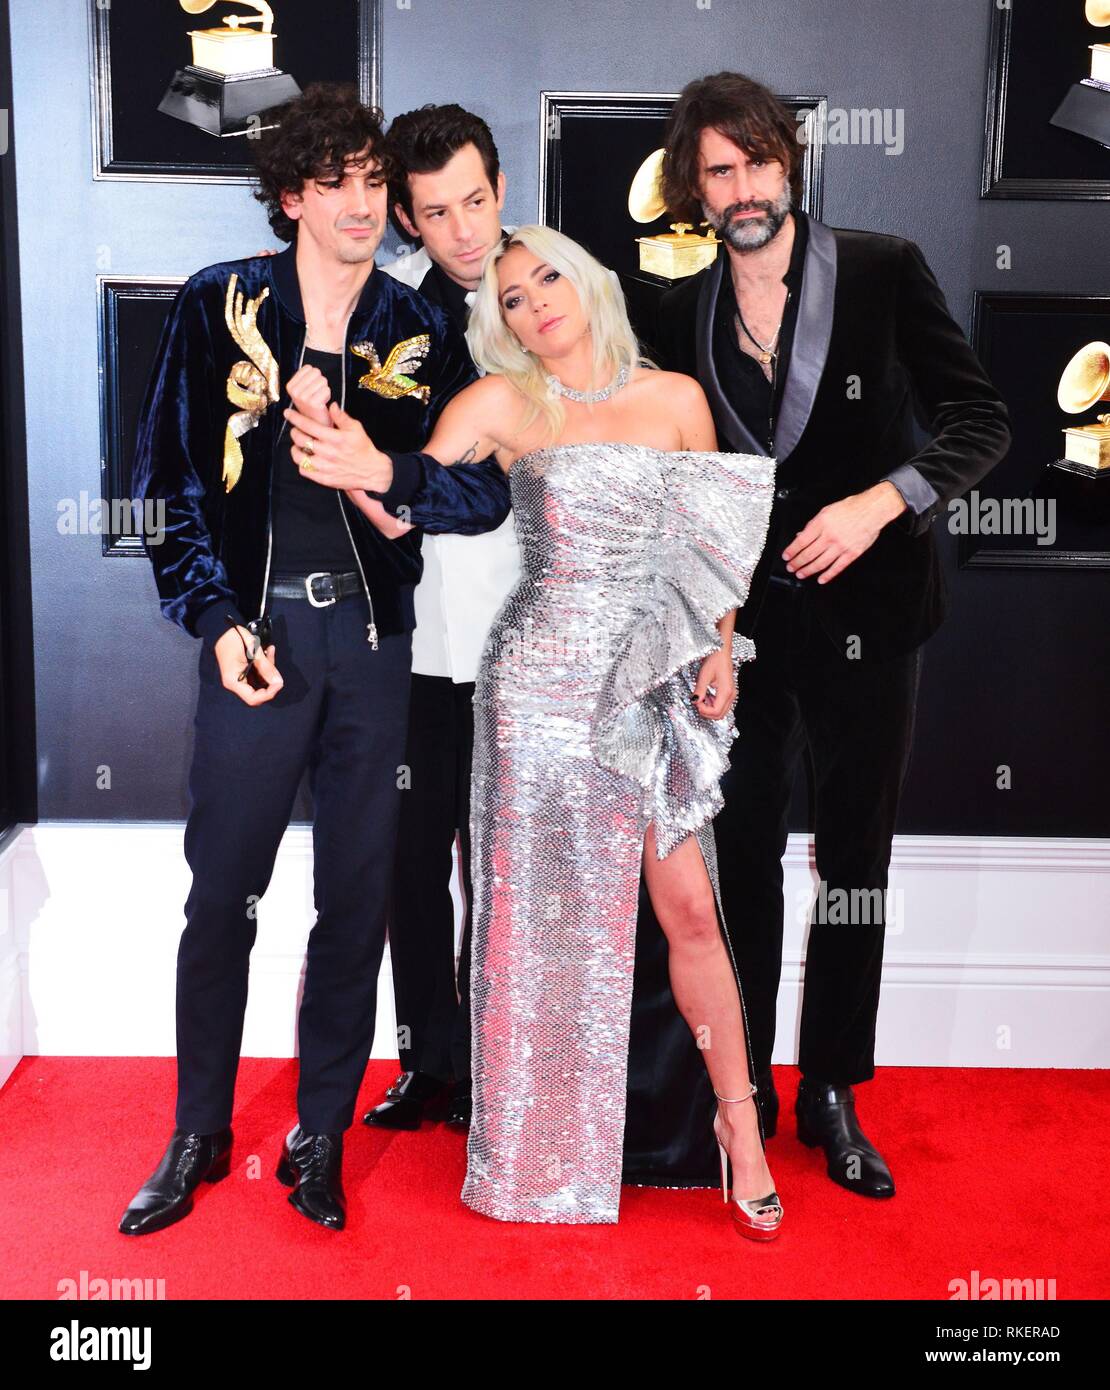 Anthony Rossomando, Lady Gaga, Andrew Wyatt, Mark Ronson at arrivals for  61st Annual Grammy Awards - Arrivals, Staples Center, Los Angeles, CA  February 10, 2019. Photo By: Tsuni/Everett Collection Stock Photo - Alamy